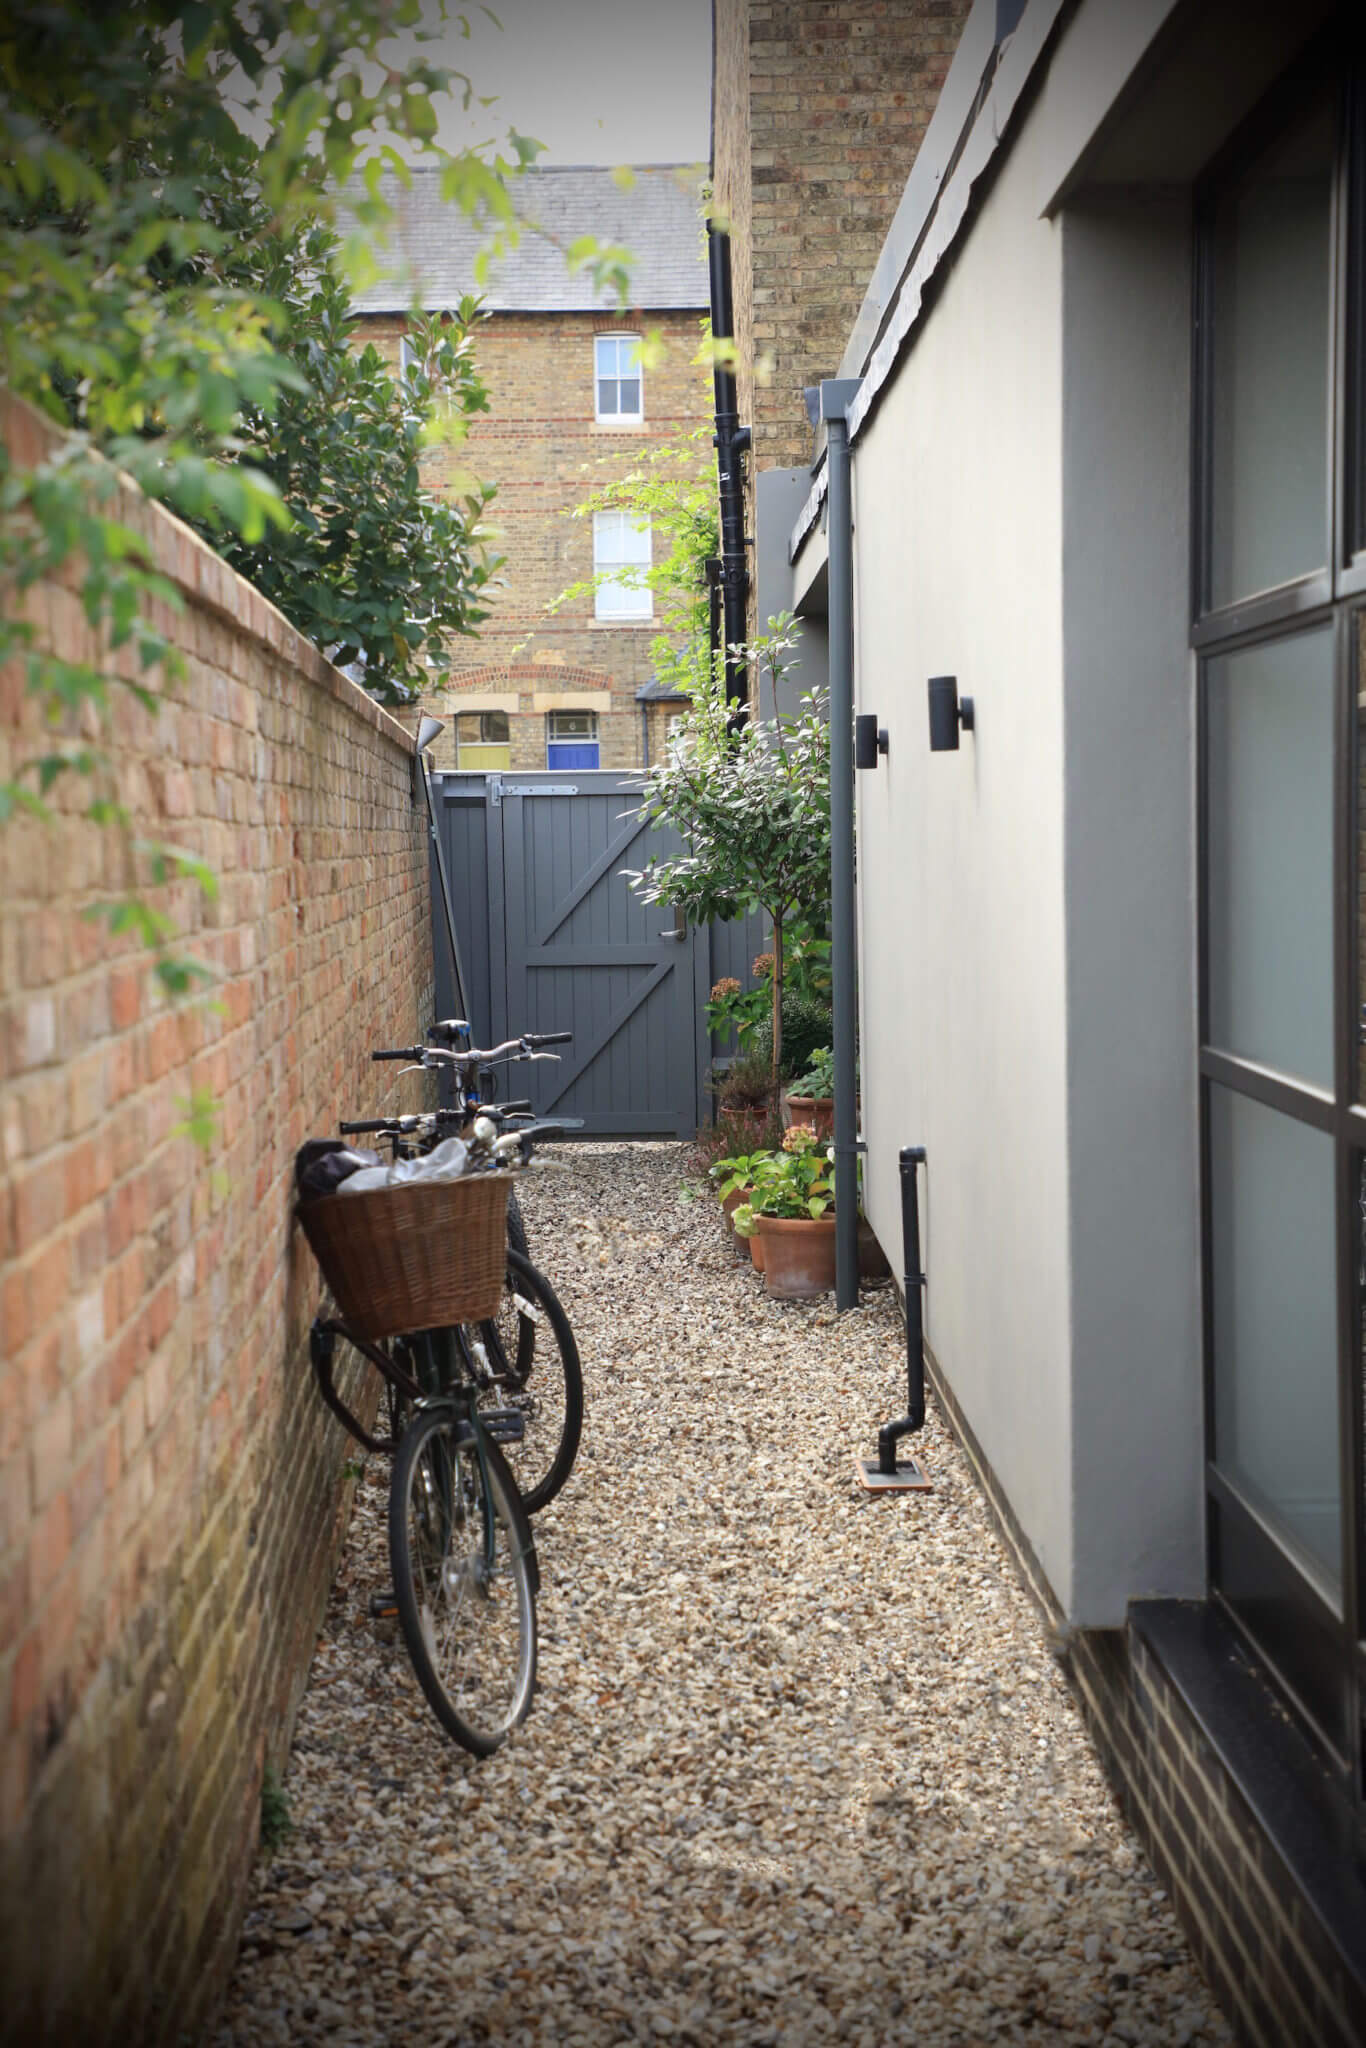 Old fashioned bike leaning against brick wall with garden gate